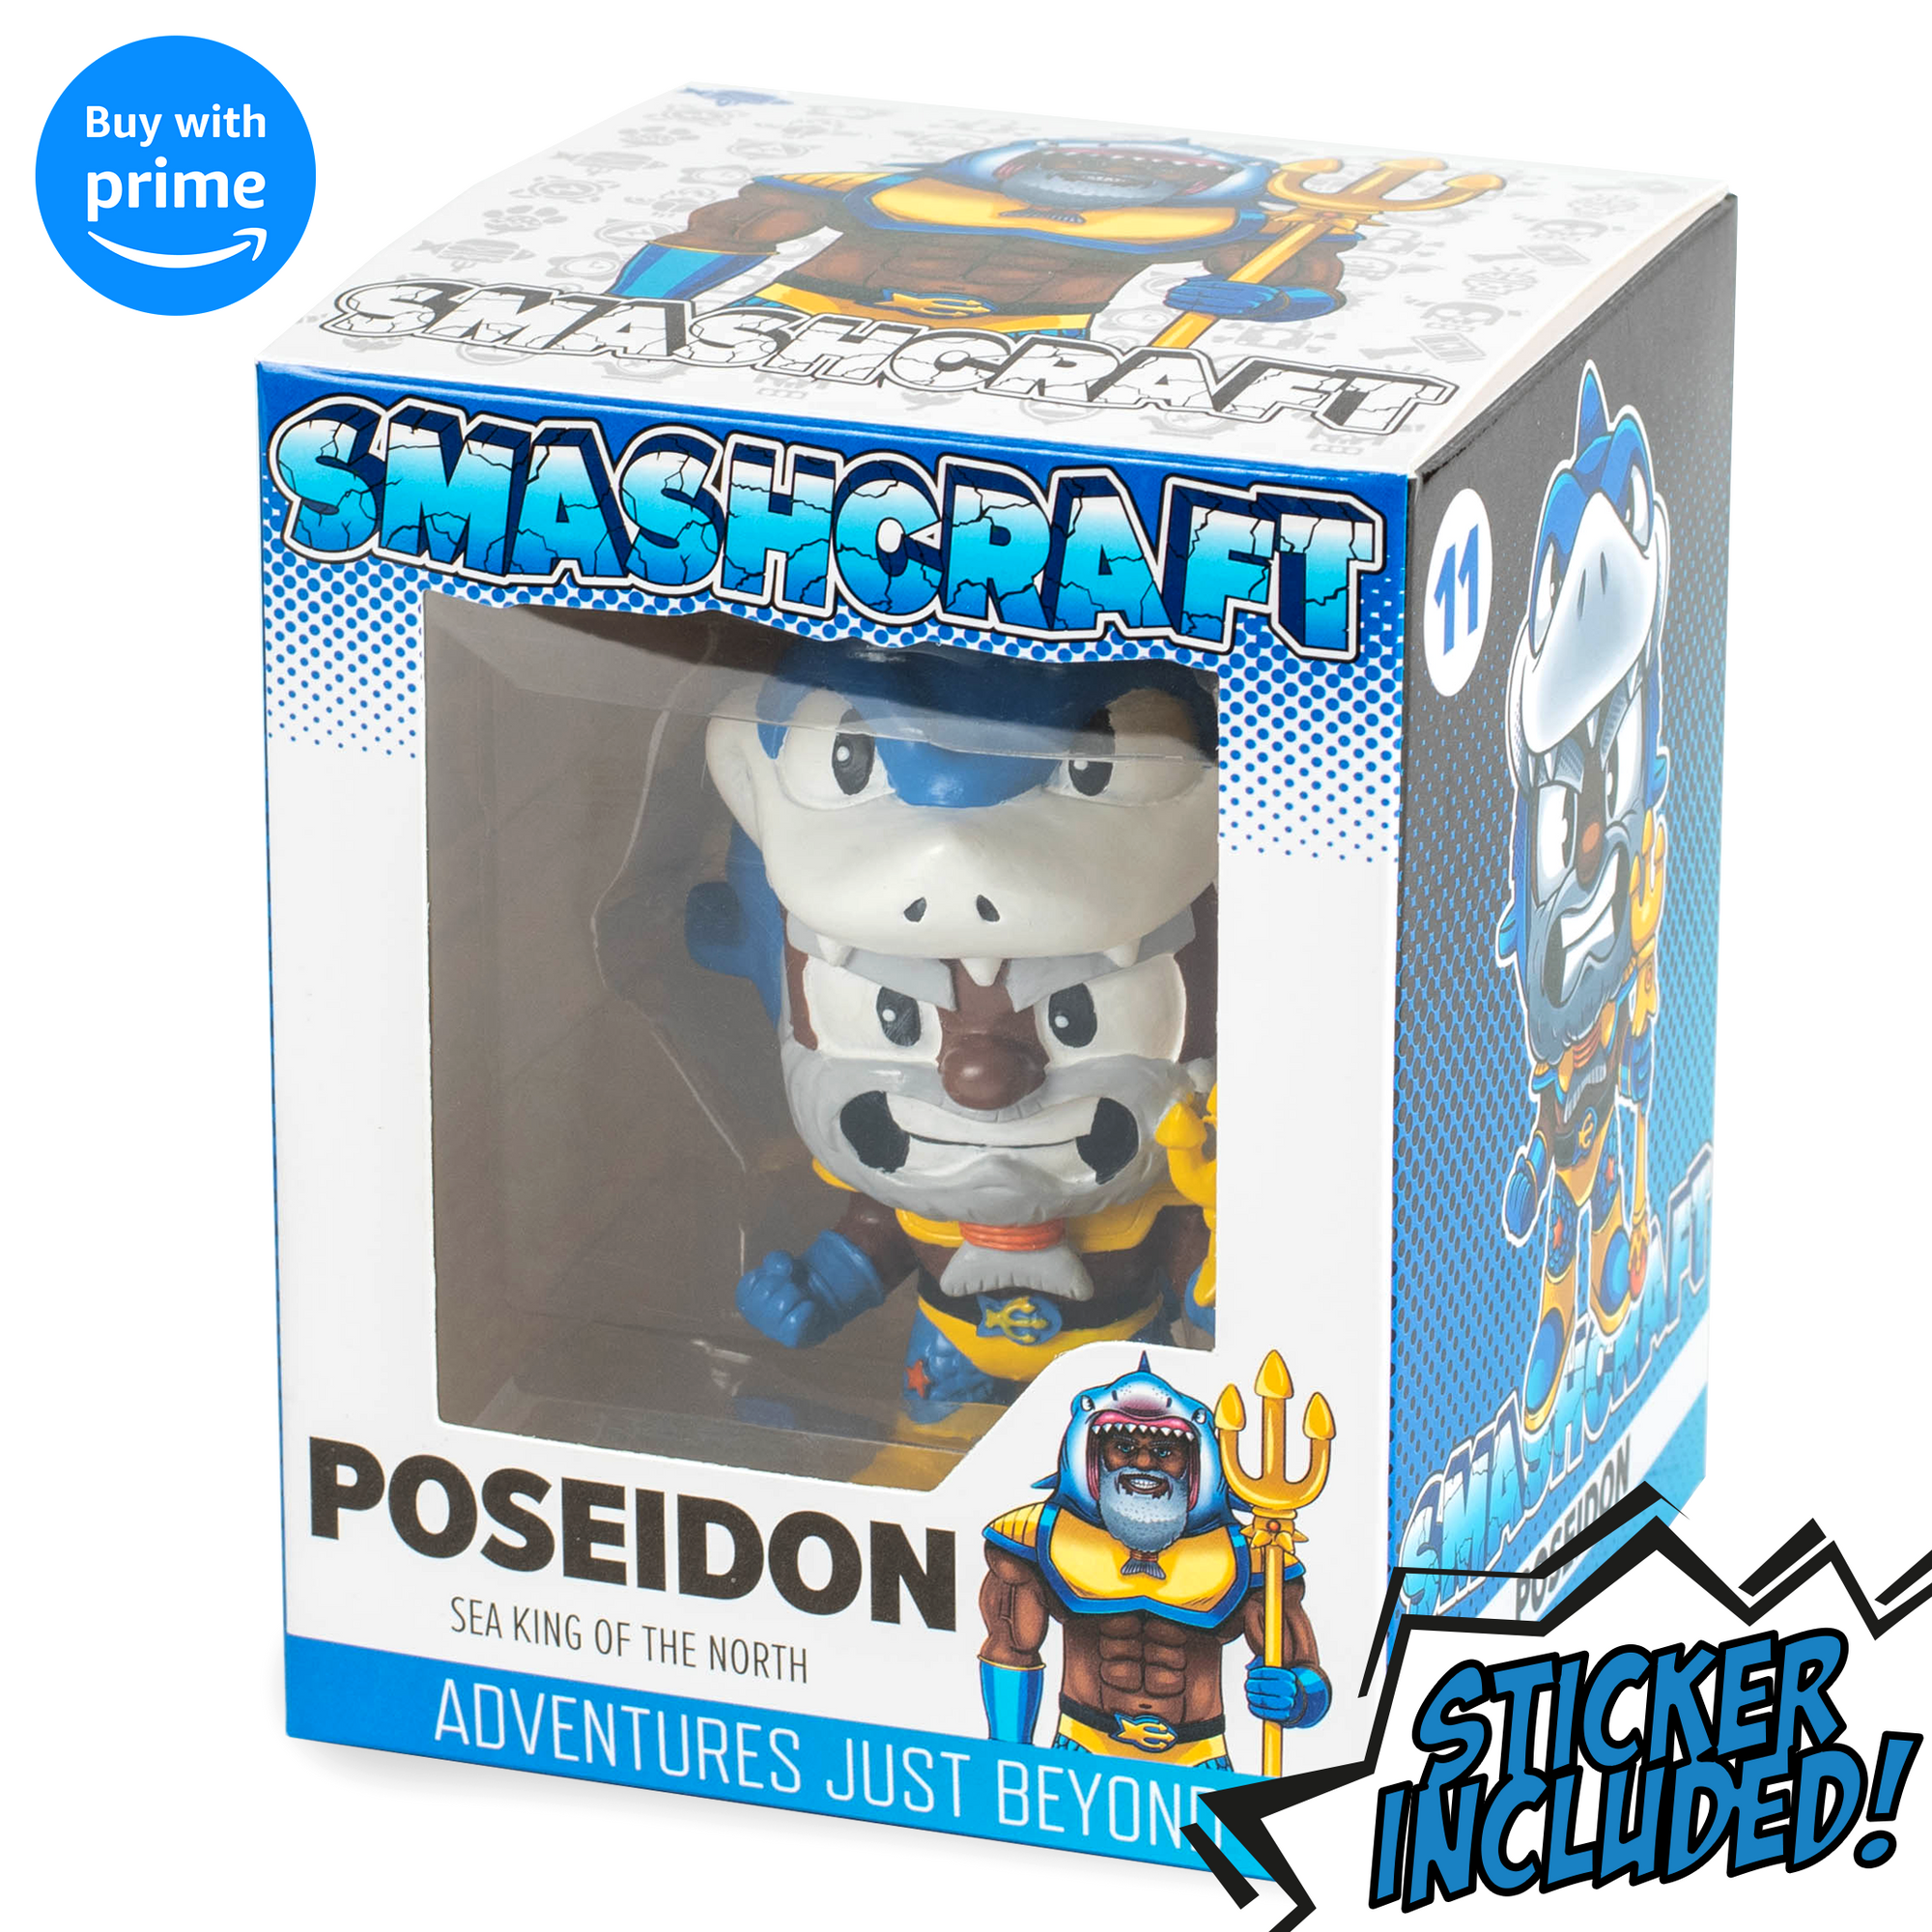 Smashcraft Poseidon collectors box, with back story and memorabilia Greek character sticker